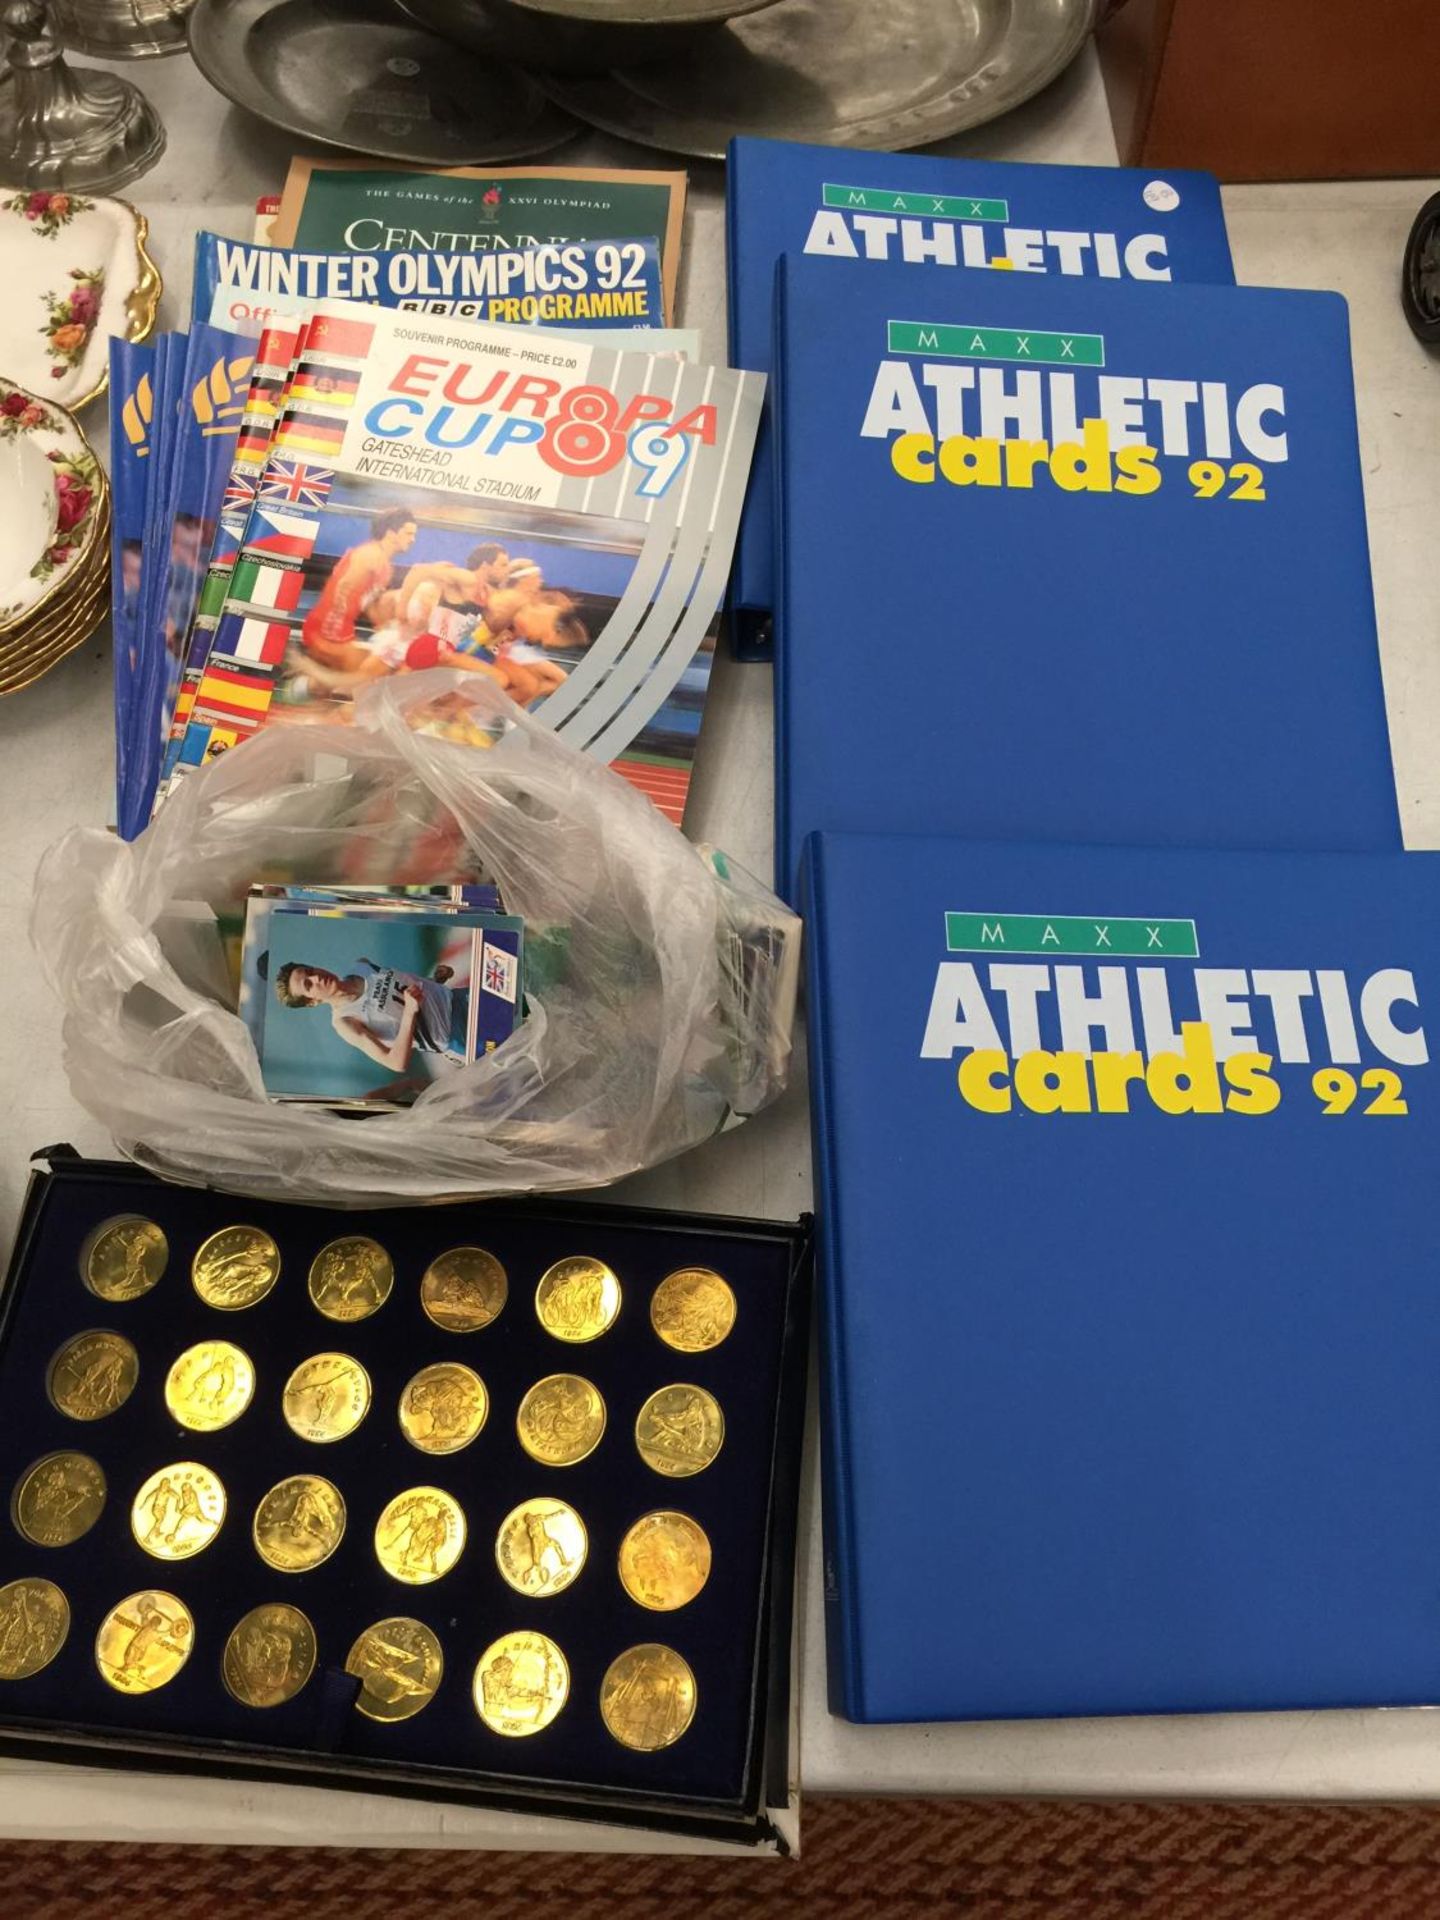 A LARGE QUANTITY OF ATHLETICS ITEMS TO INCLUDE MAXX CARDS, SOUVENIR PROGRAMMES, A SET OF TRANSIT